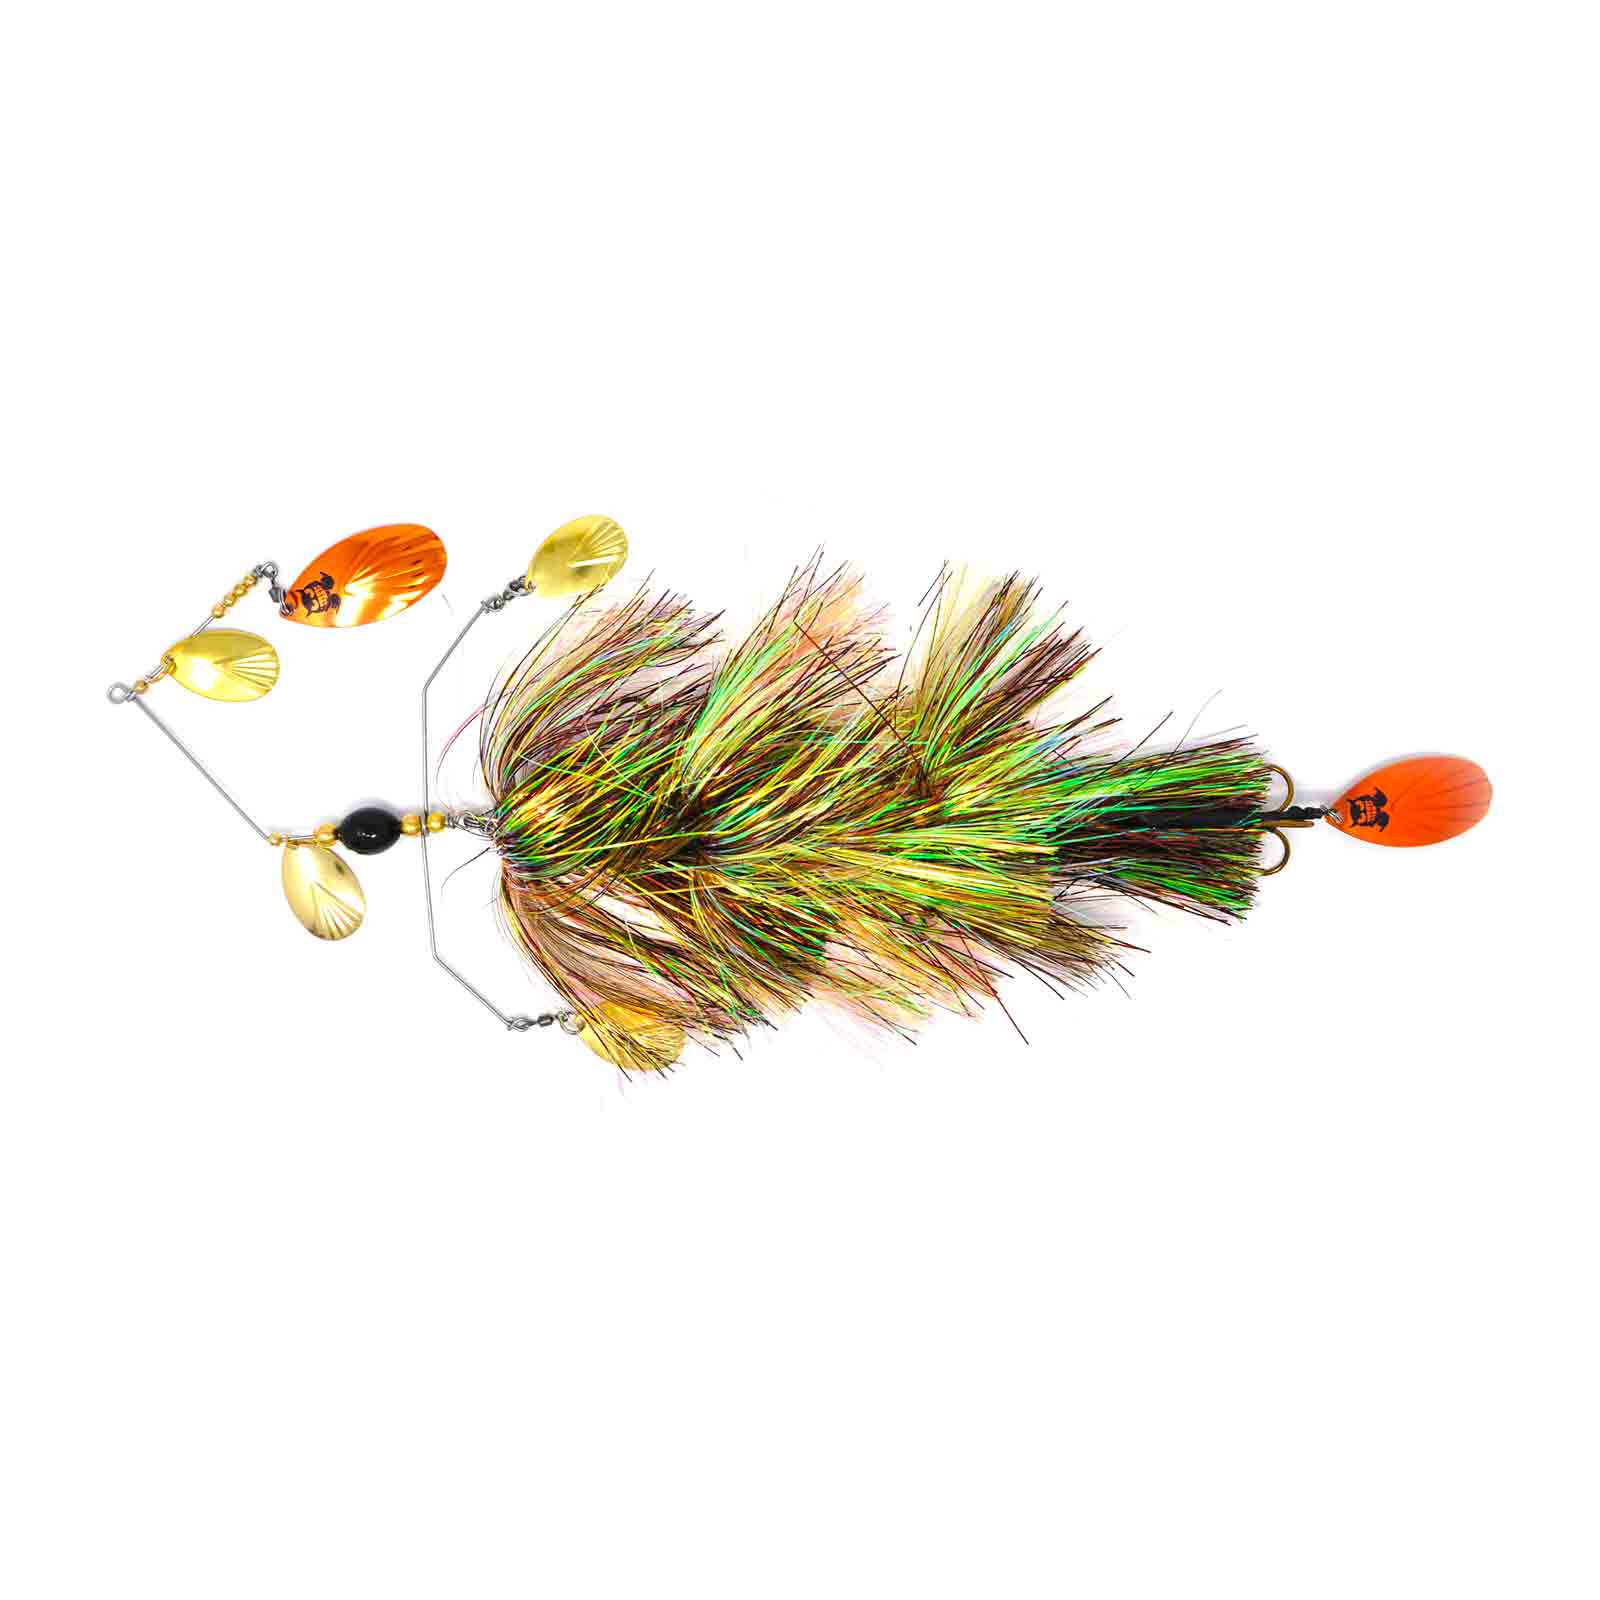 View of Bucktails Mad Chasse Monster Troller - Mad School Toxic pike available at EZOKO Pike and Musky Shop